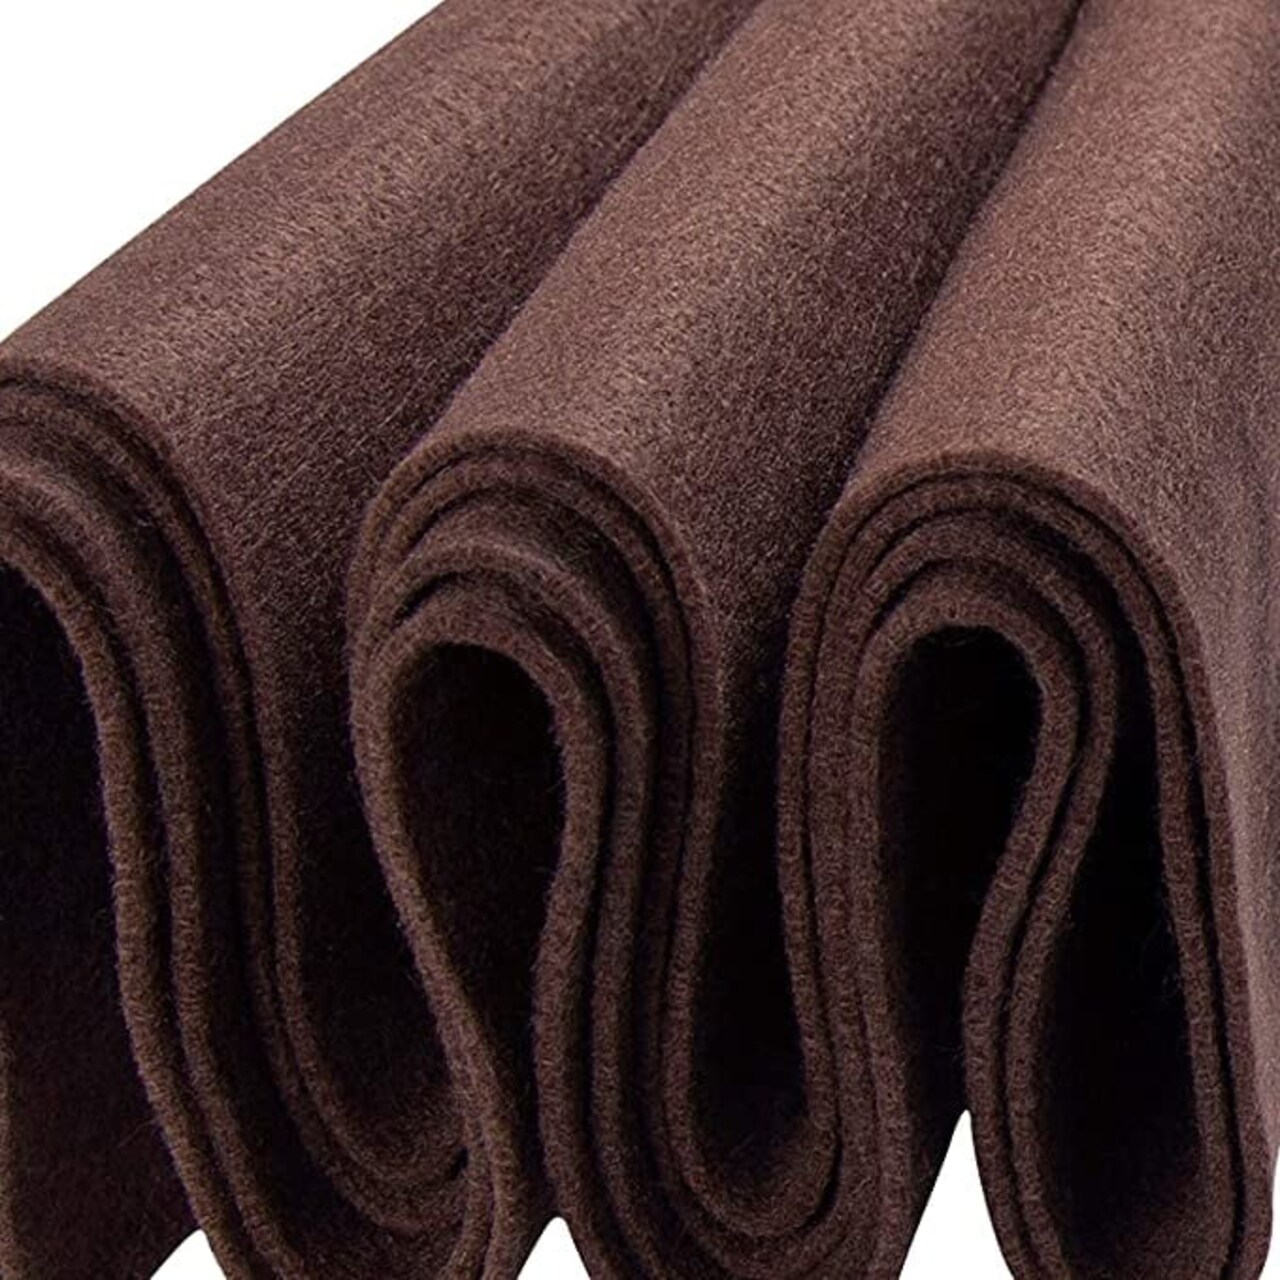 FabricLA Craft Felt Fabric - 72 Inch Wide & 1.6mm Thick Non-Stiff Felt  Fabric by The Yard - Use This Soft Felt Roll for Crafts - Felt Material  Pack - Light Brown